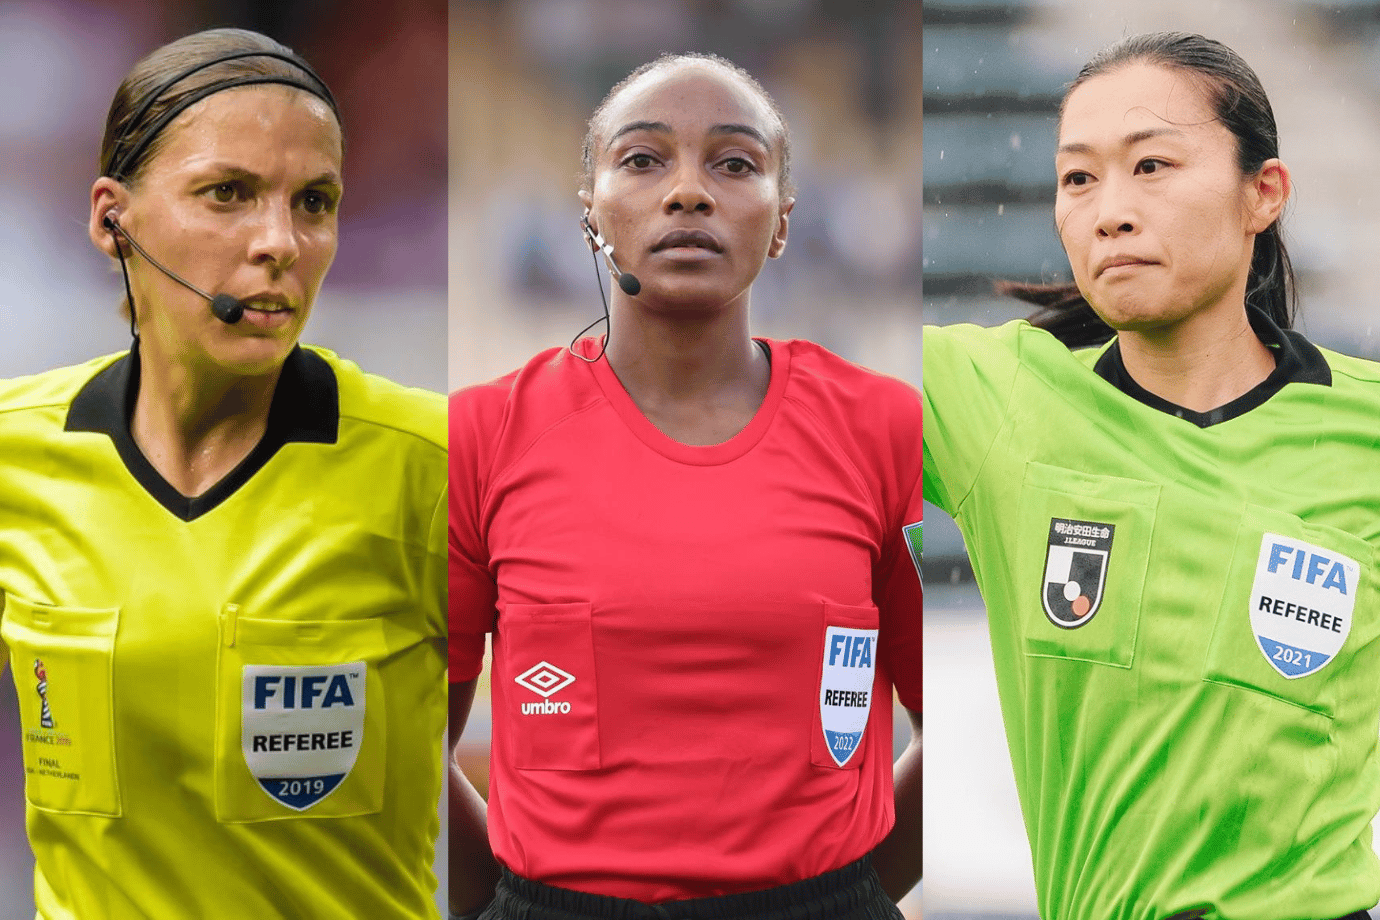 Women to referee a FIFA World Cup for first time in history at Qatar